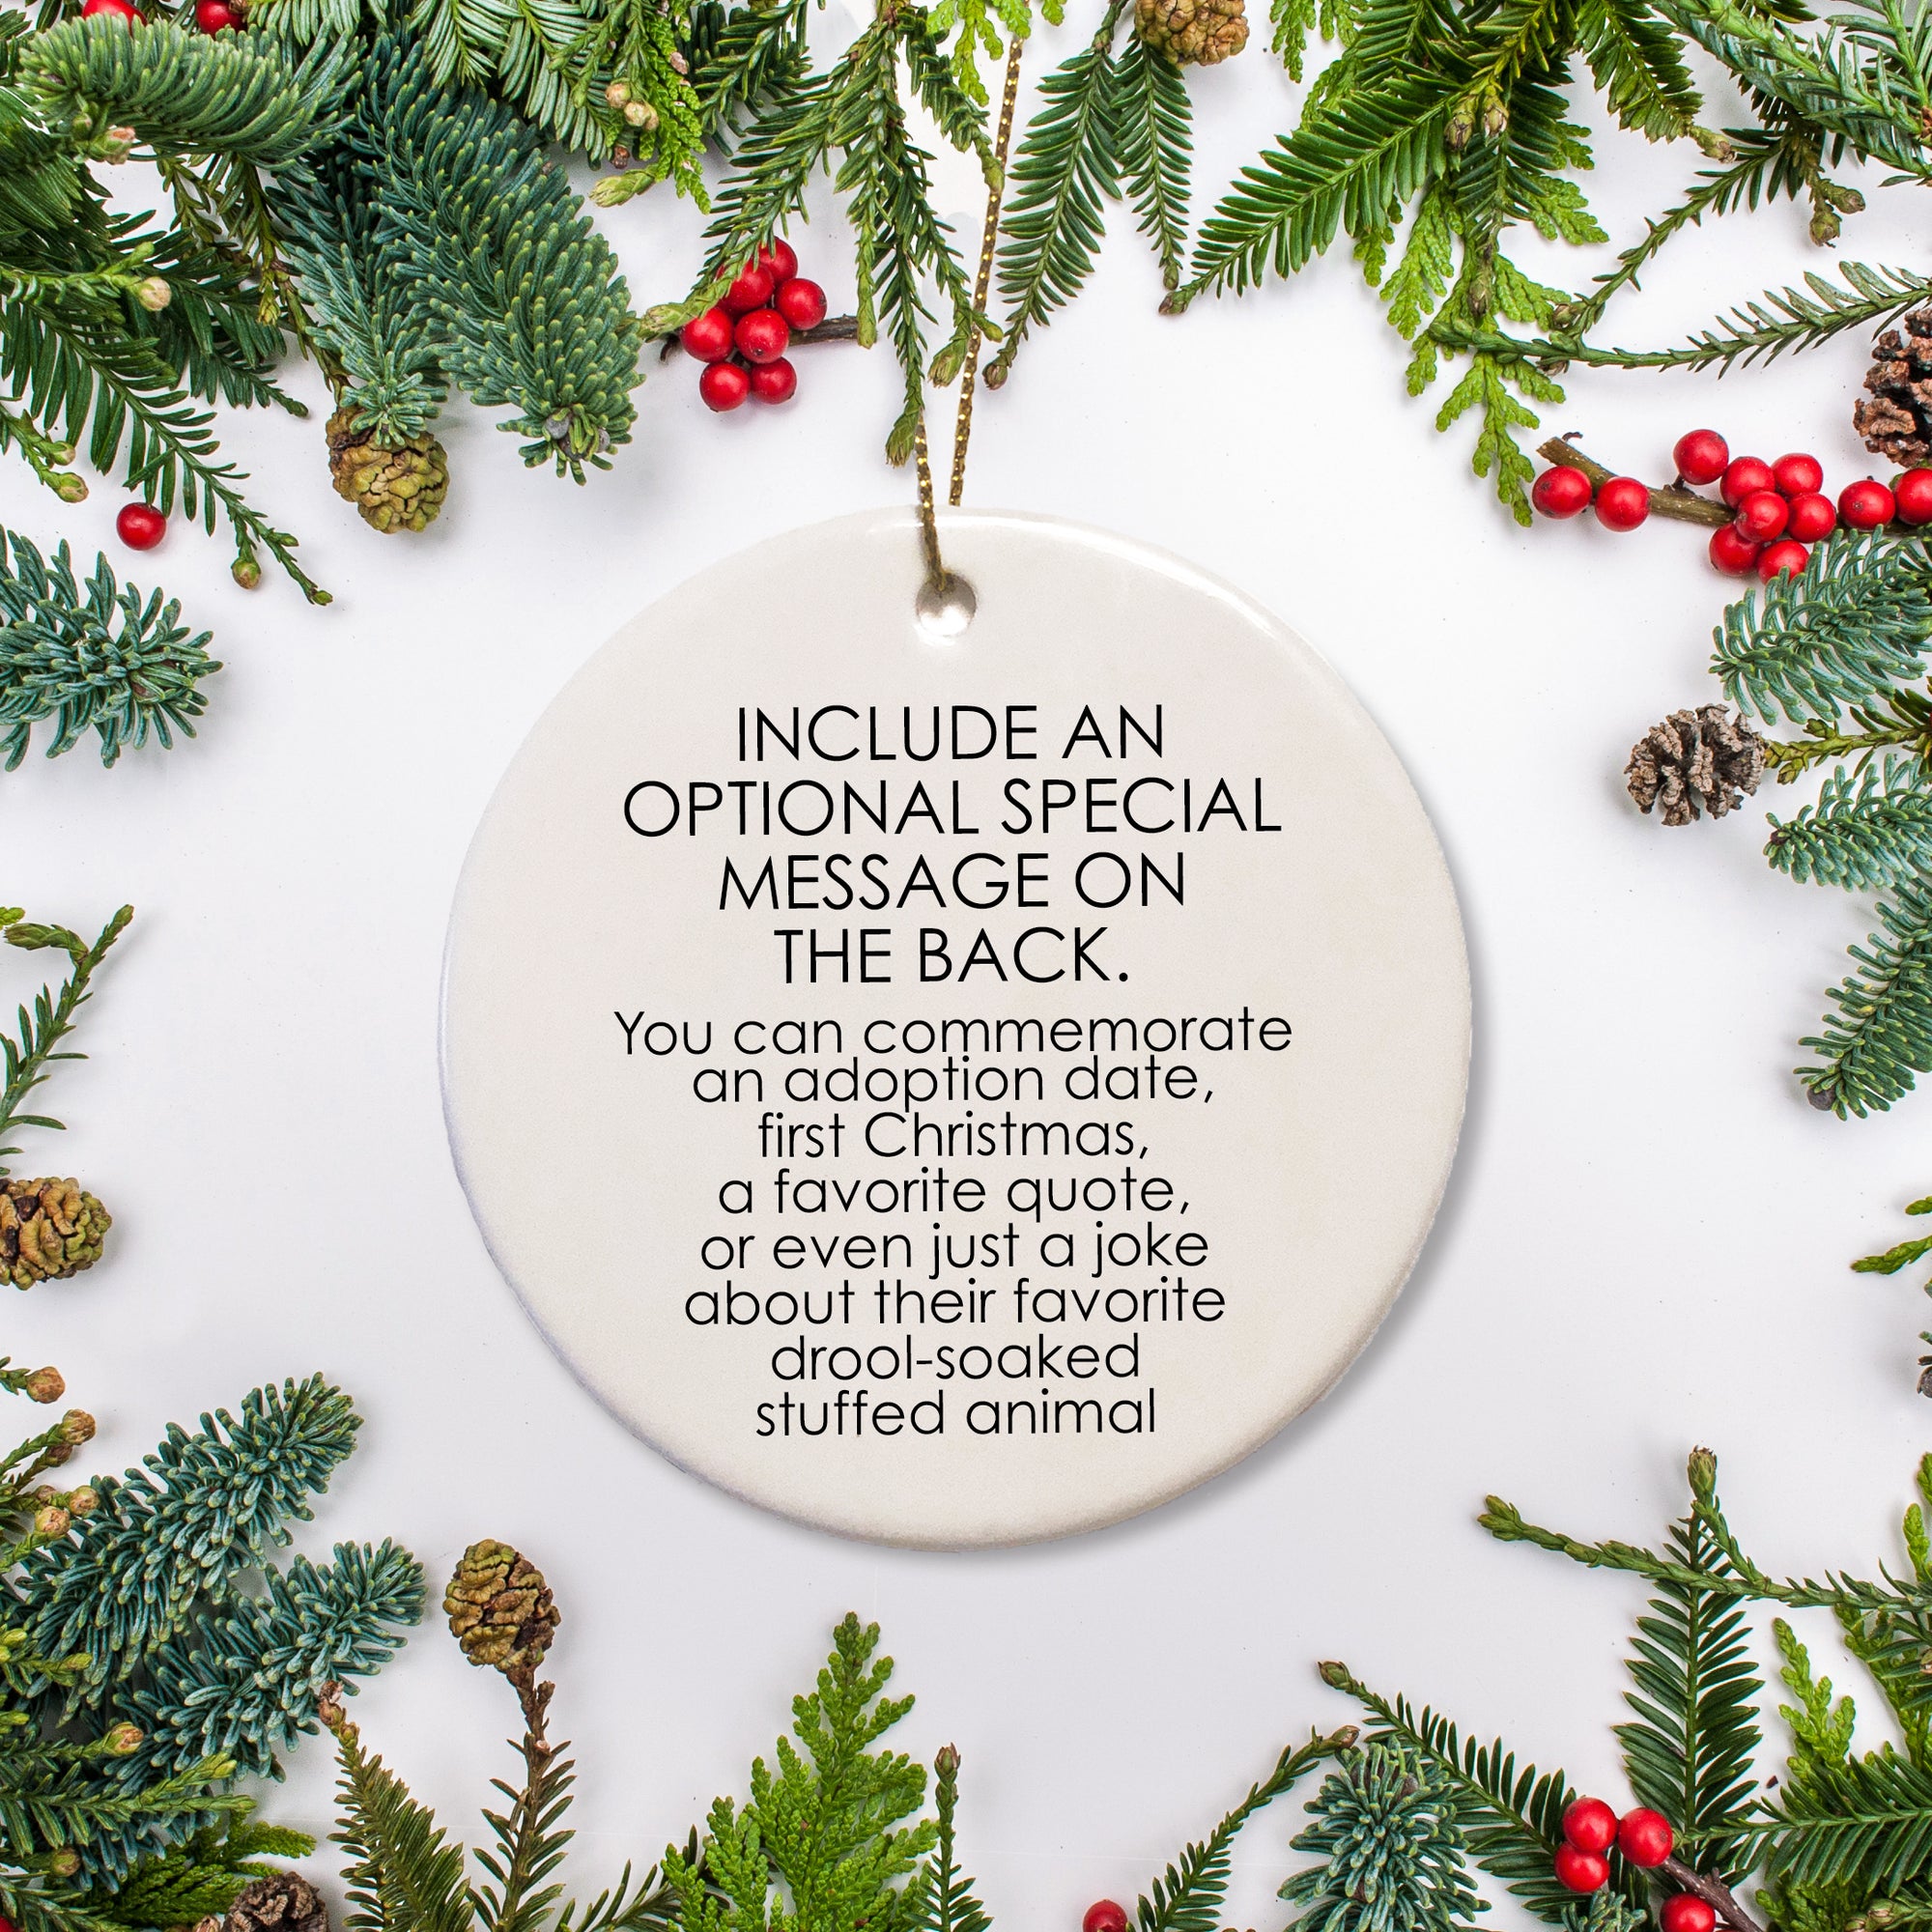 The back of the ornament provides an option to include a special message of your choice.  It could be a memory, a date, a quote, or whatever you want.